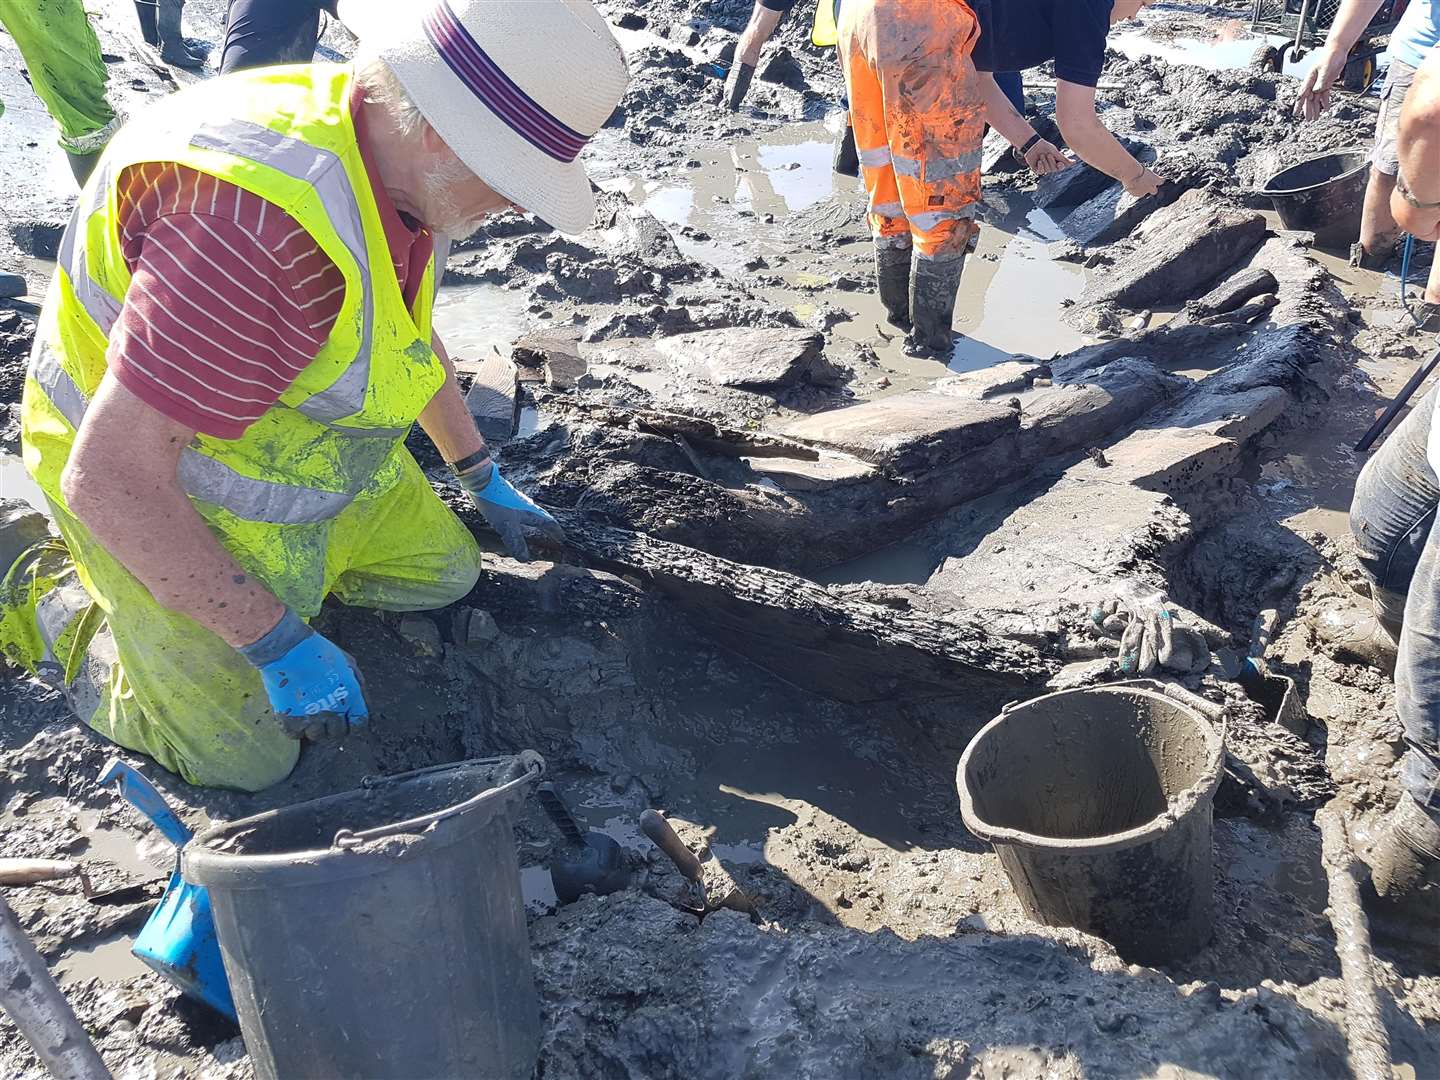 A volunteer carrying out excavation work at the ship's bow